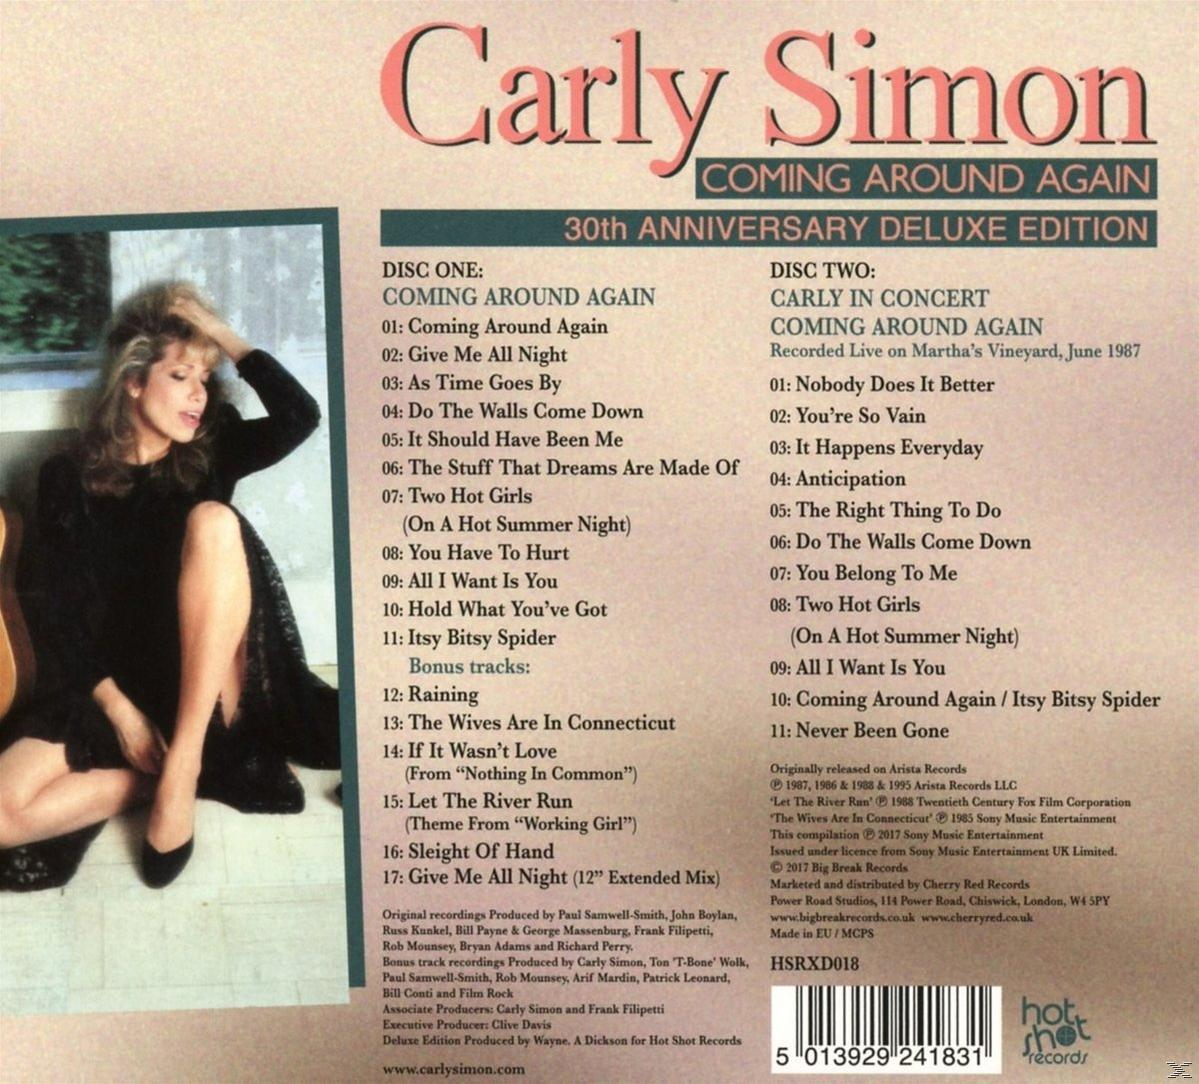 Again (CD) Around Carly Coming (Deluxe - Simon 2CD - Edition)